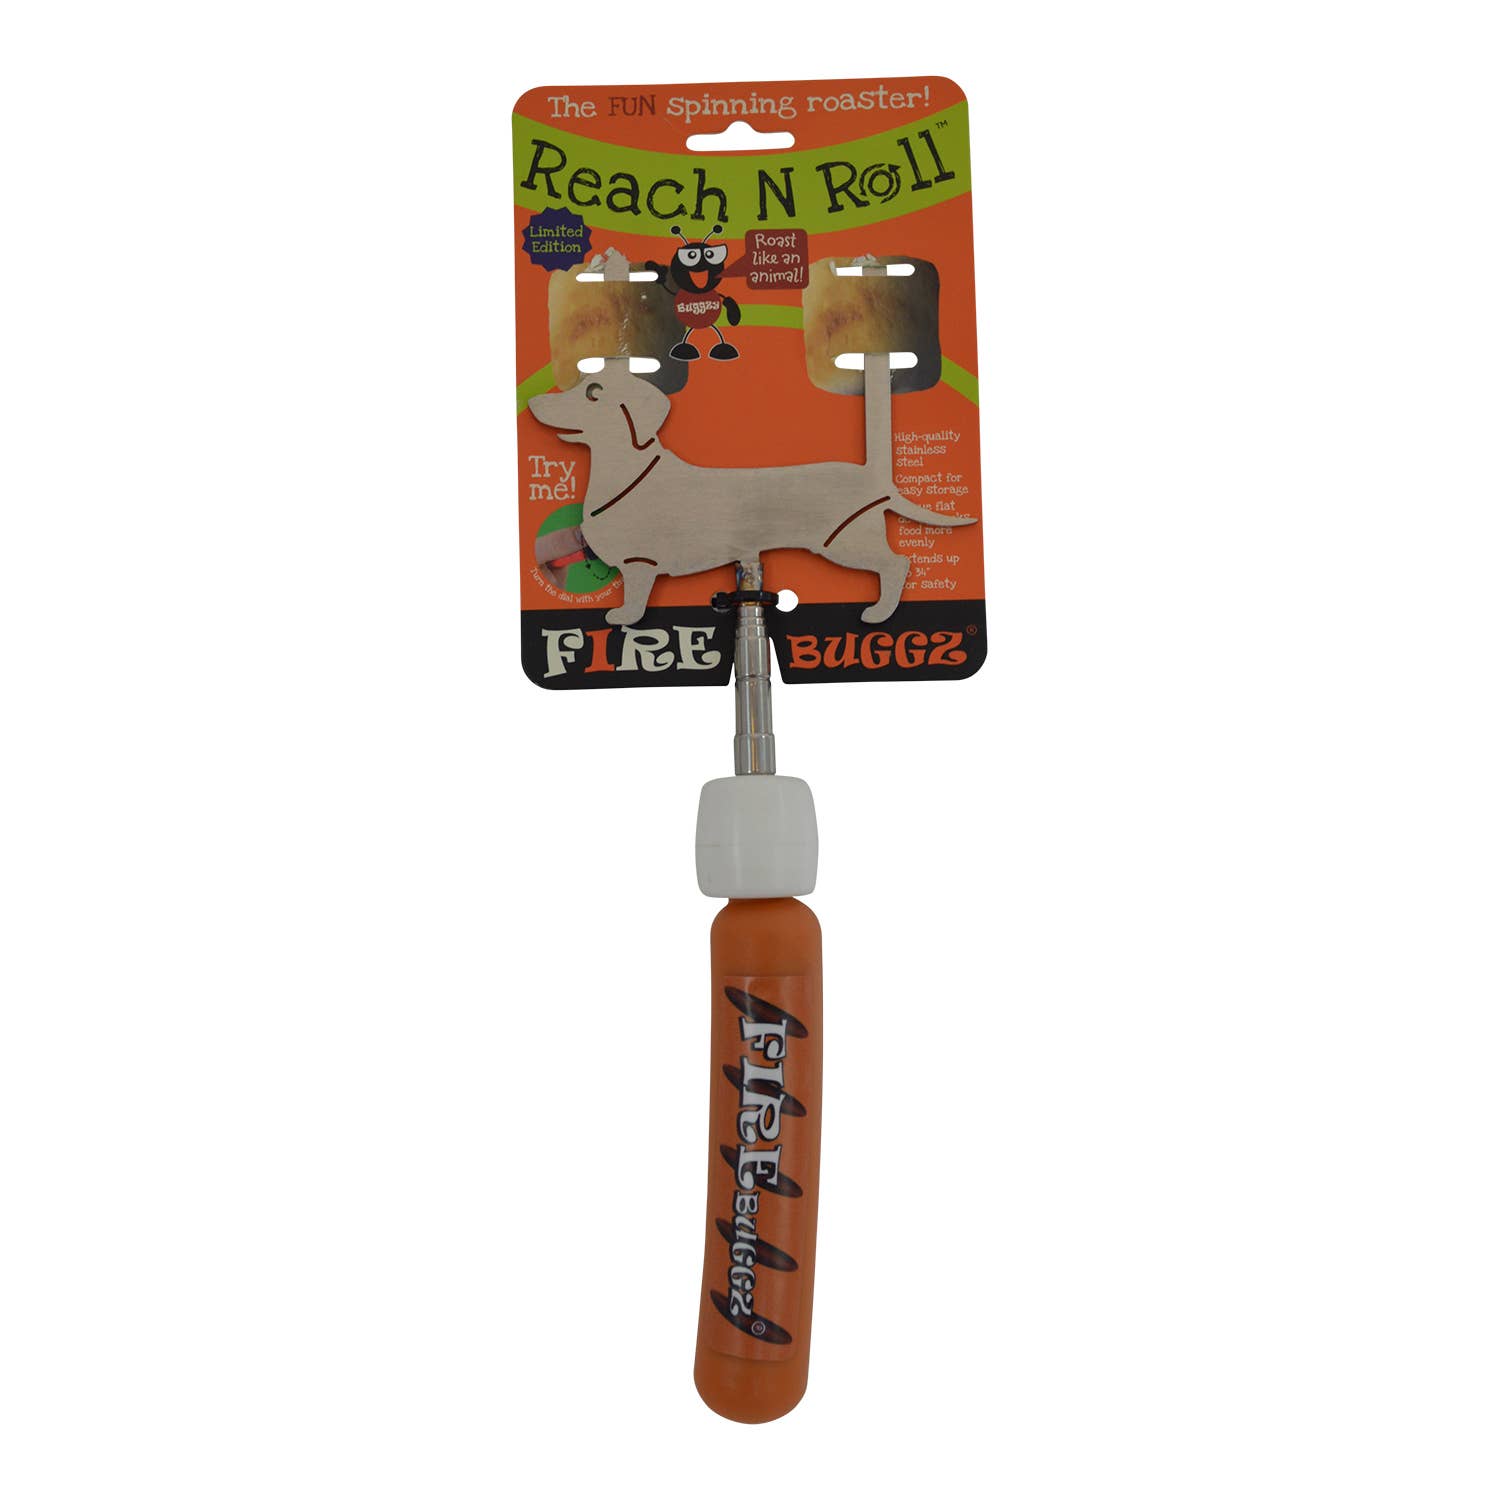 Package of "Wiener Dog Reach N Roll Firebuggz," a fun spinning roaster with a cartoon dog illustration on an orange background, displayed with a brown extendable handle featuring a marshmallow turn